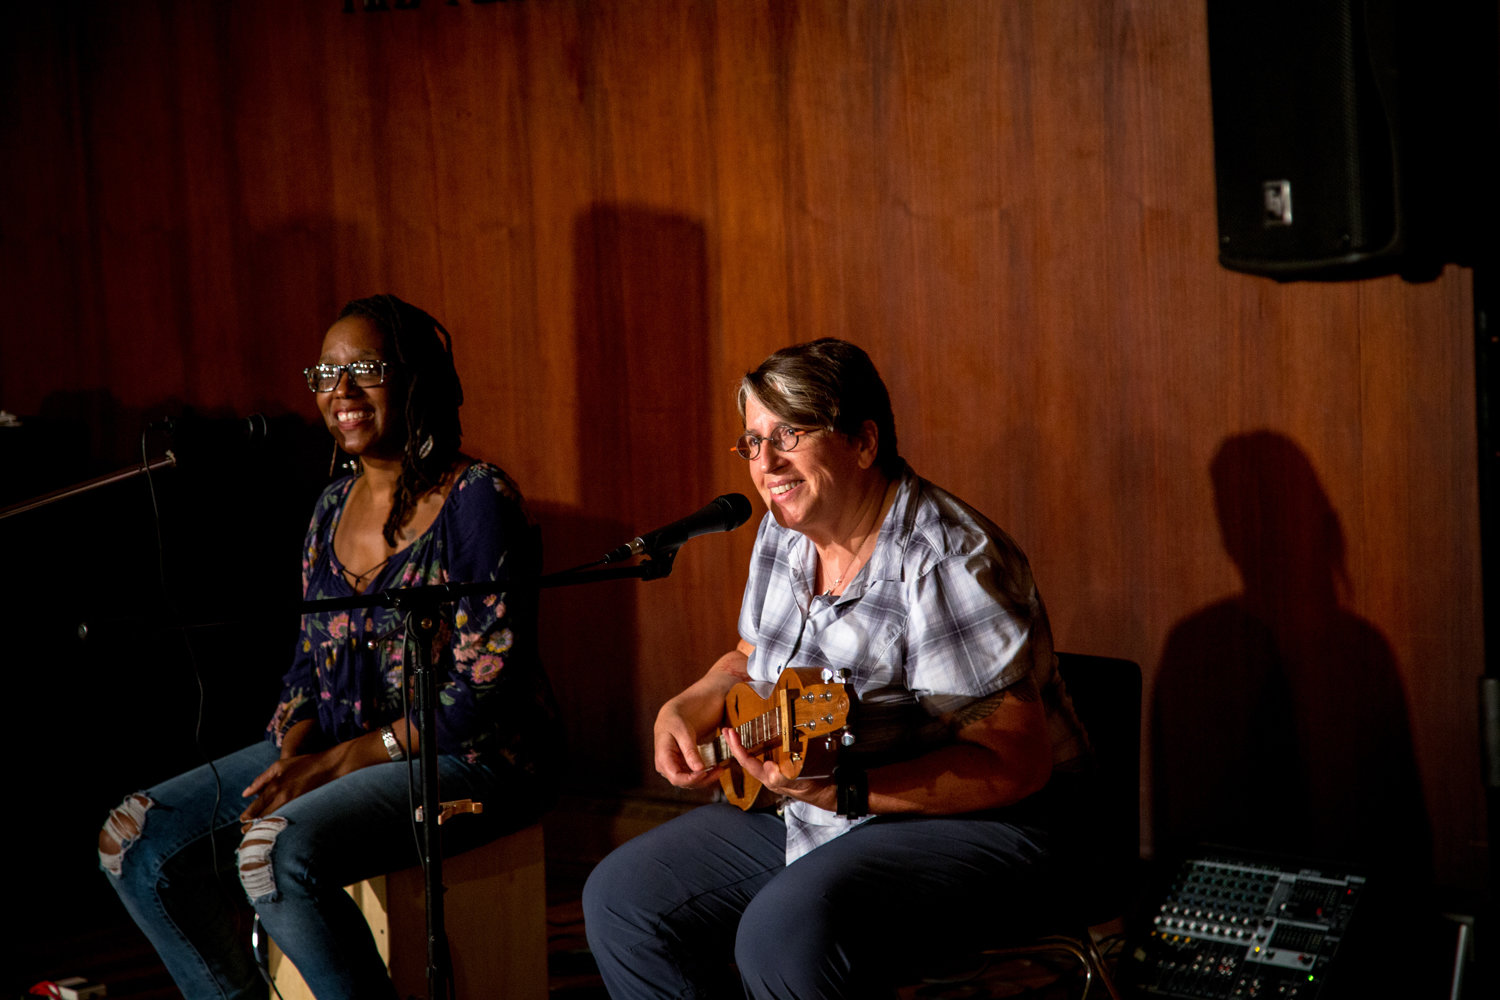 DK & the Joy Machine, right, plays folk music with Lindsey Wilson, left, during a Coffee House event at the Riverdale-Yonkers Society for Ethical Culture in 2018. Live performances can no longer be found at the society as a consequence of the coronavirus pandemic.